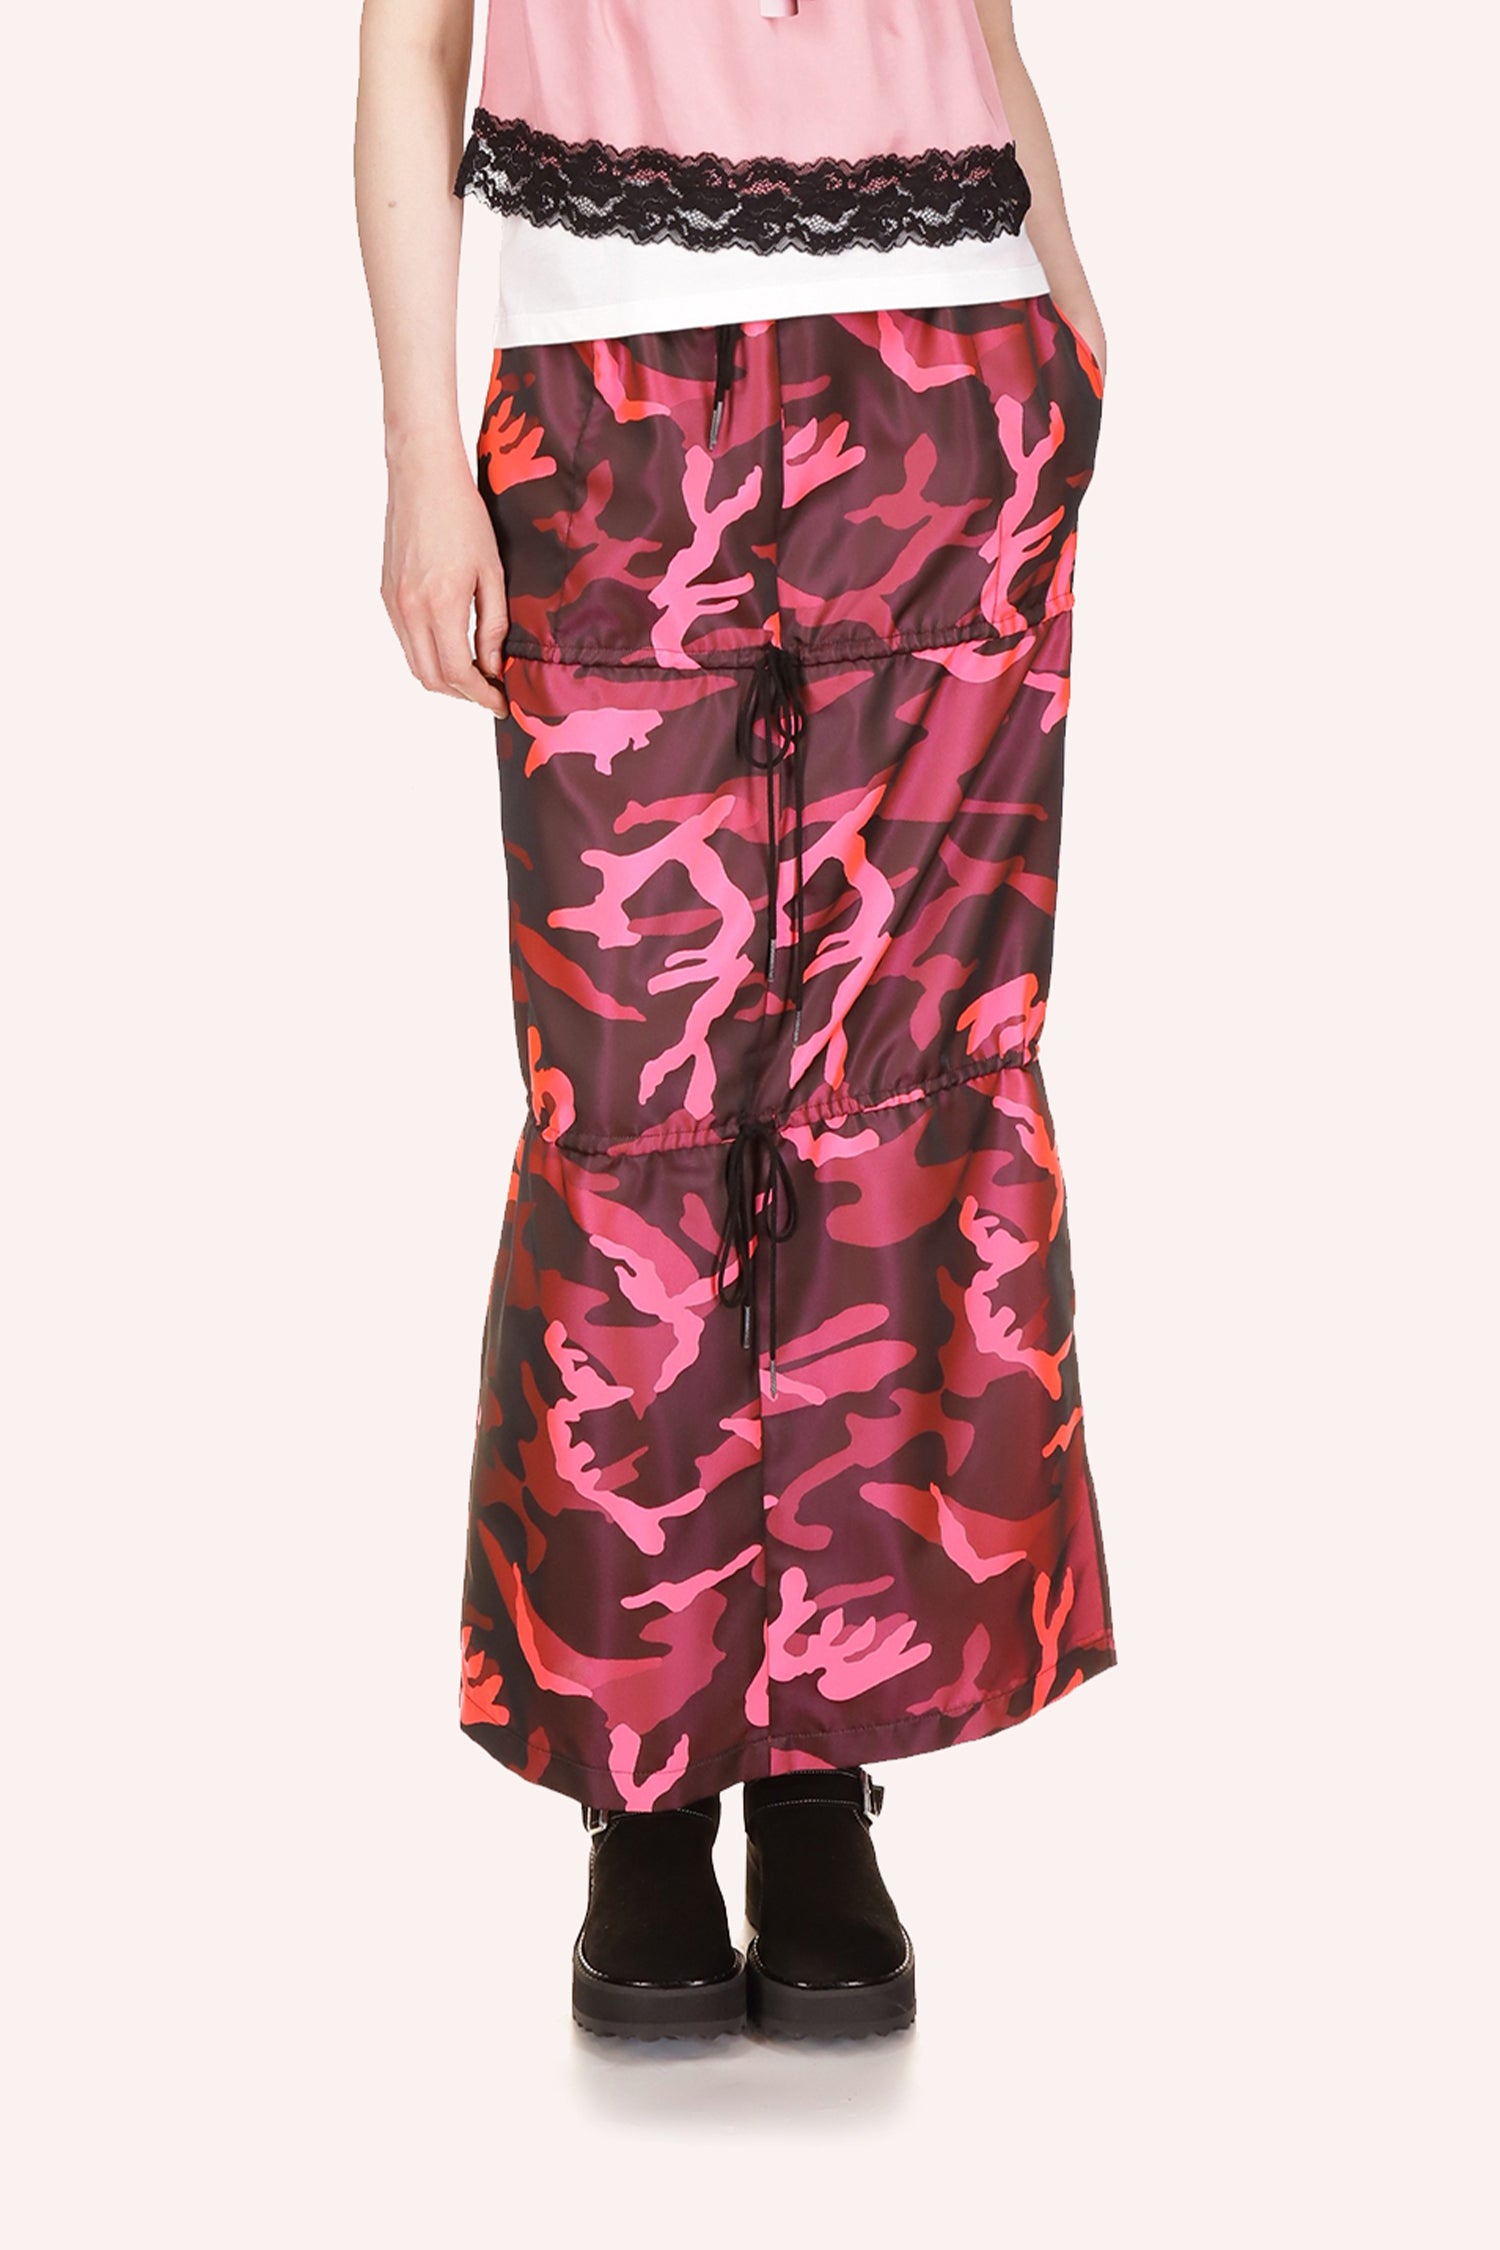  Camouflage skirt, dark pink, pink, light pink top to the bottom, 3 levels, side pocket, 2-laces to adjust